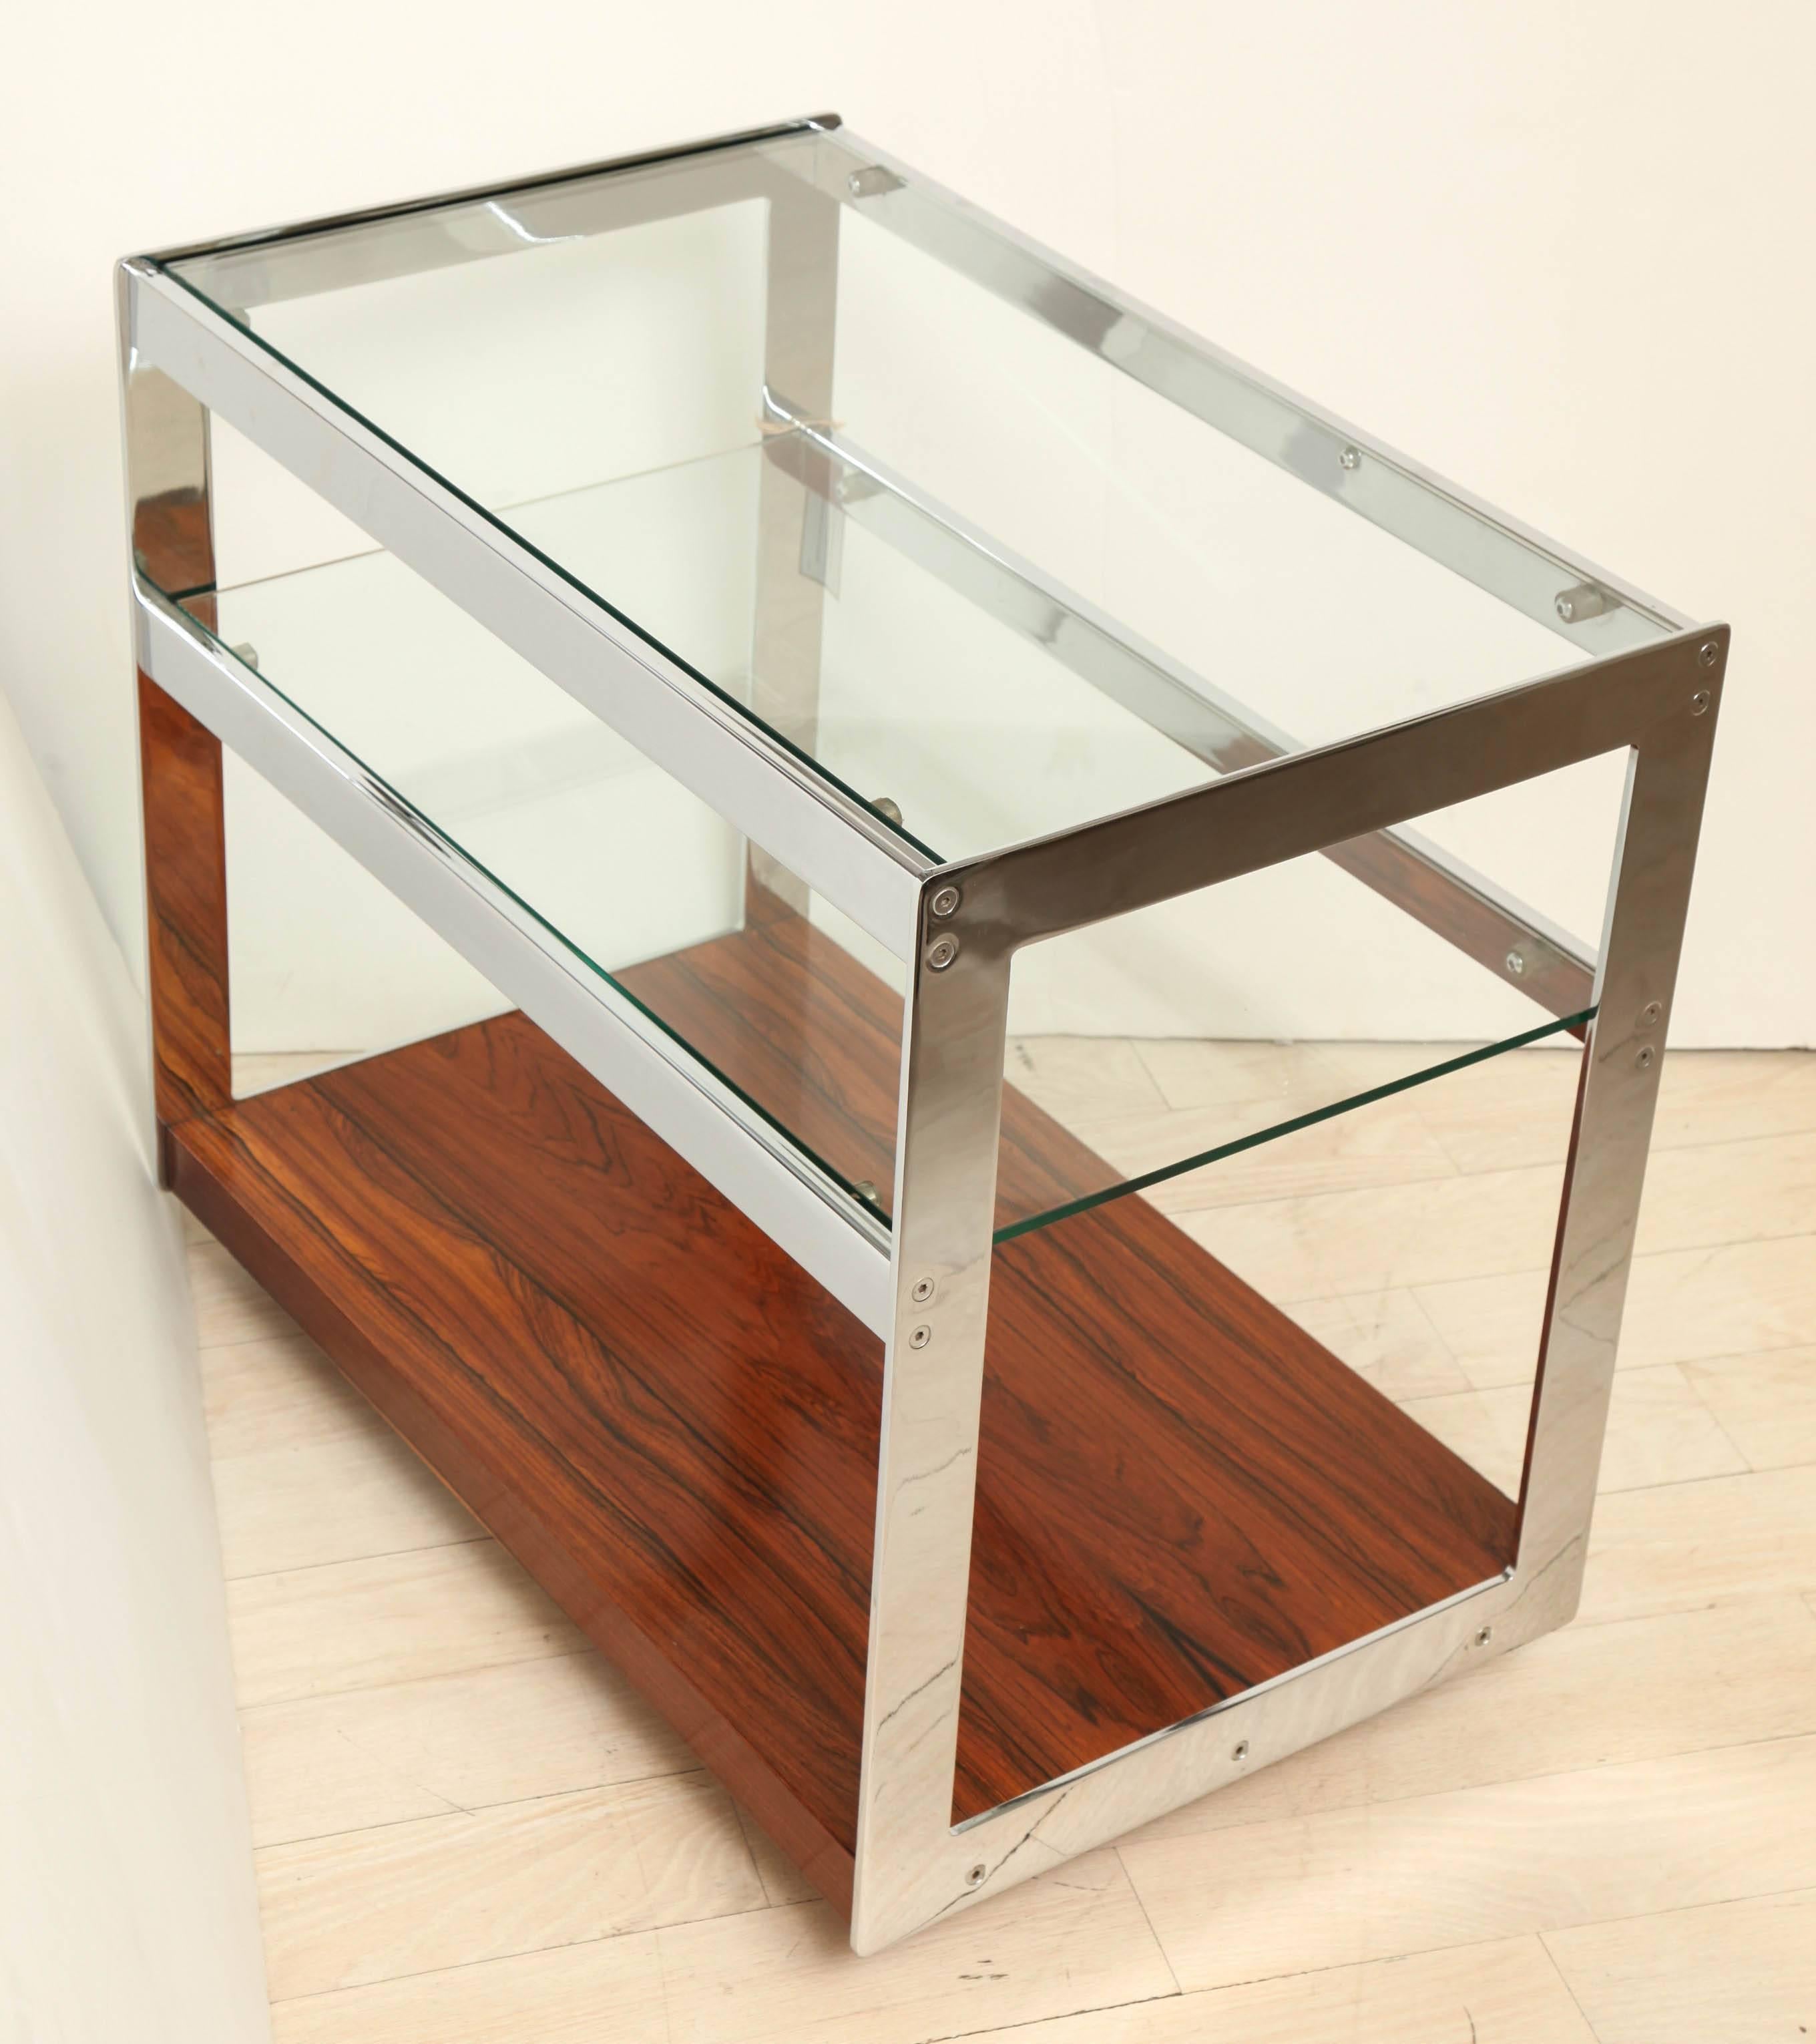 1970s Chrome & Rosewood Bar Cart/Trolley by Richard Young for Merrow Associates 2